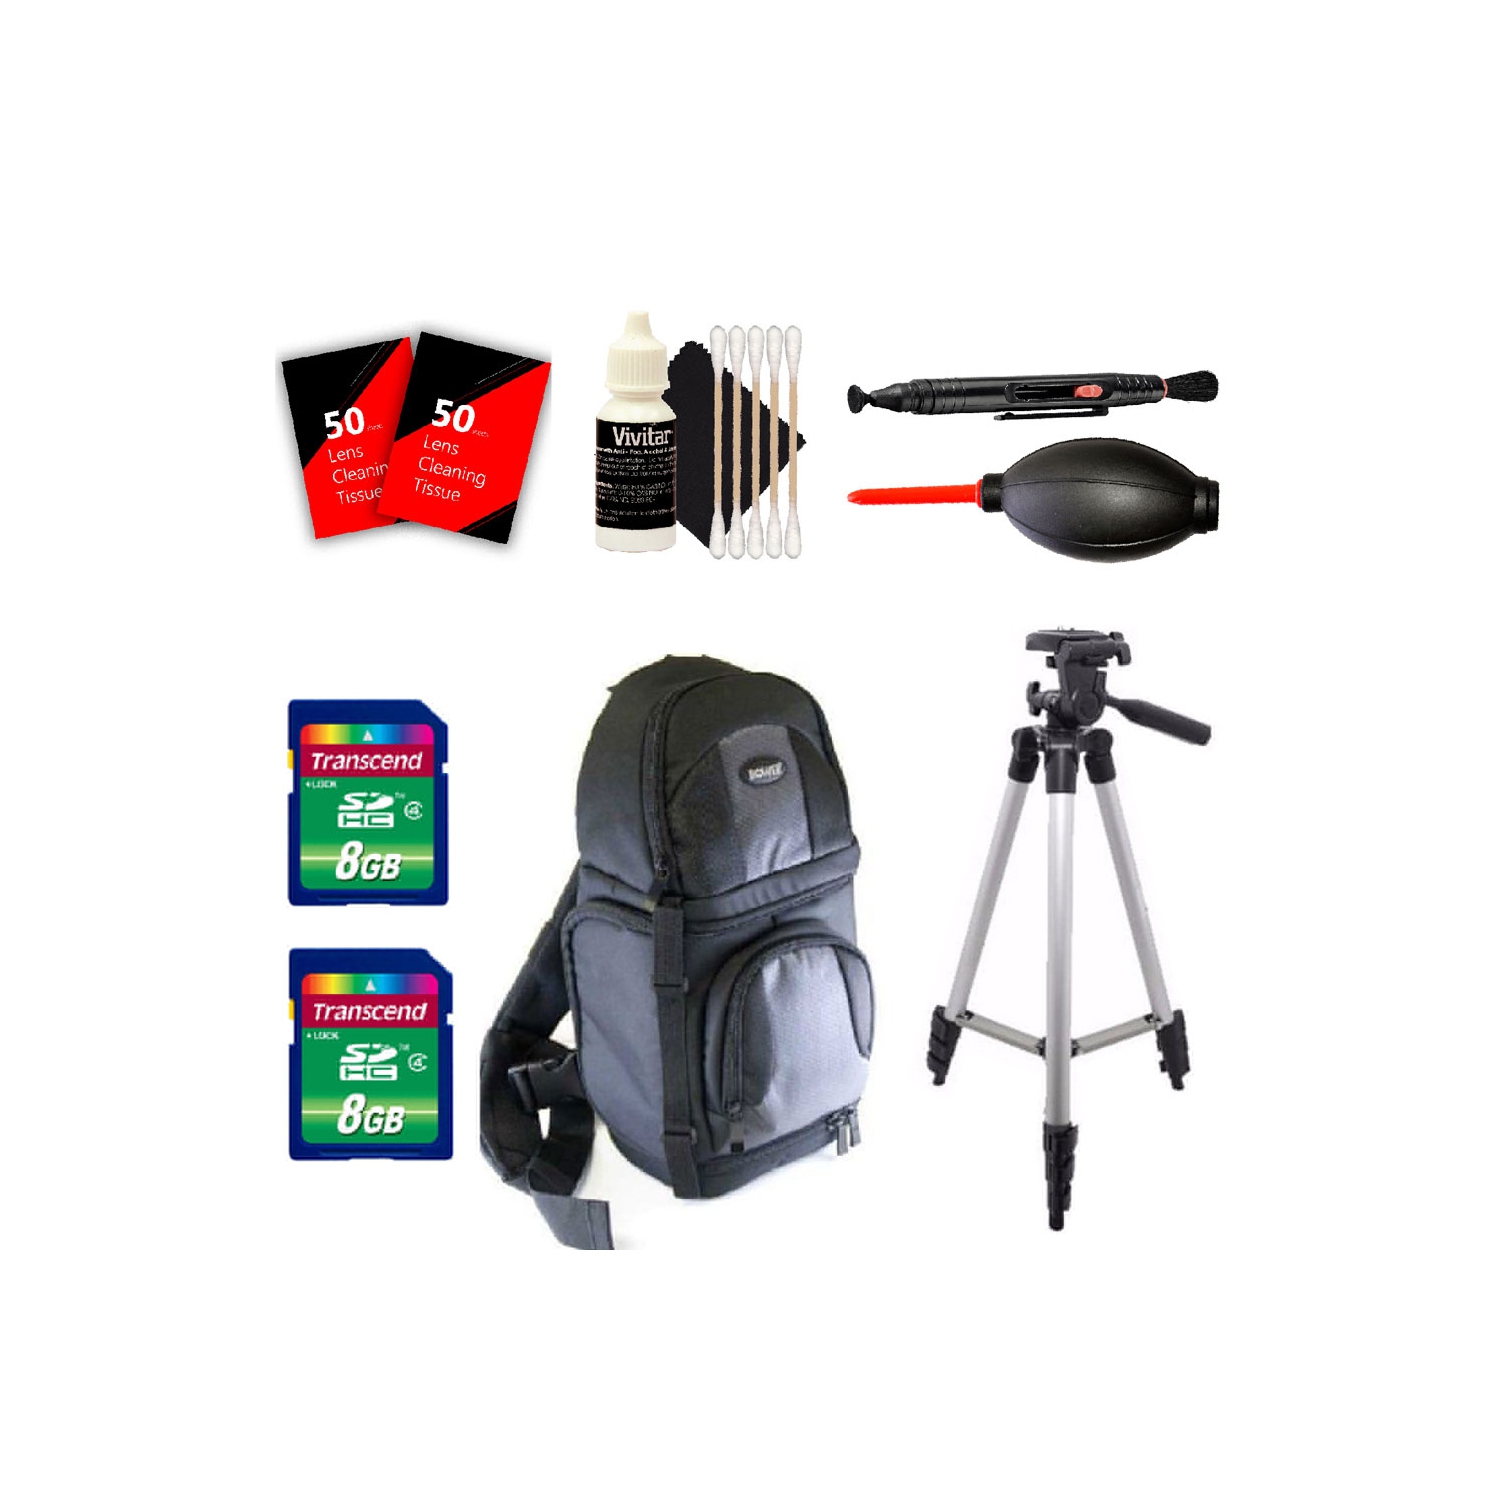 Tall Tripod, BackPack, Memory Cards and More for Canon Eos Rebel T5 T5i T6 T6i T6s 70D 80D and All Digital Cameras